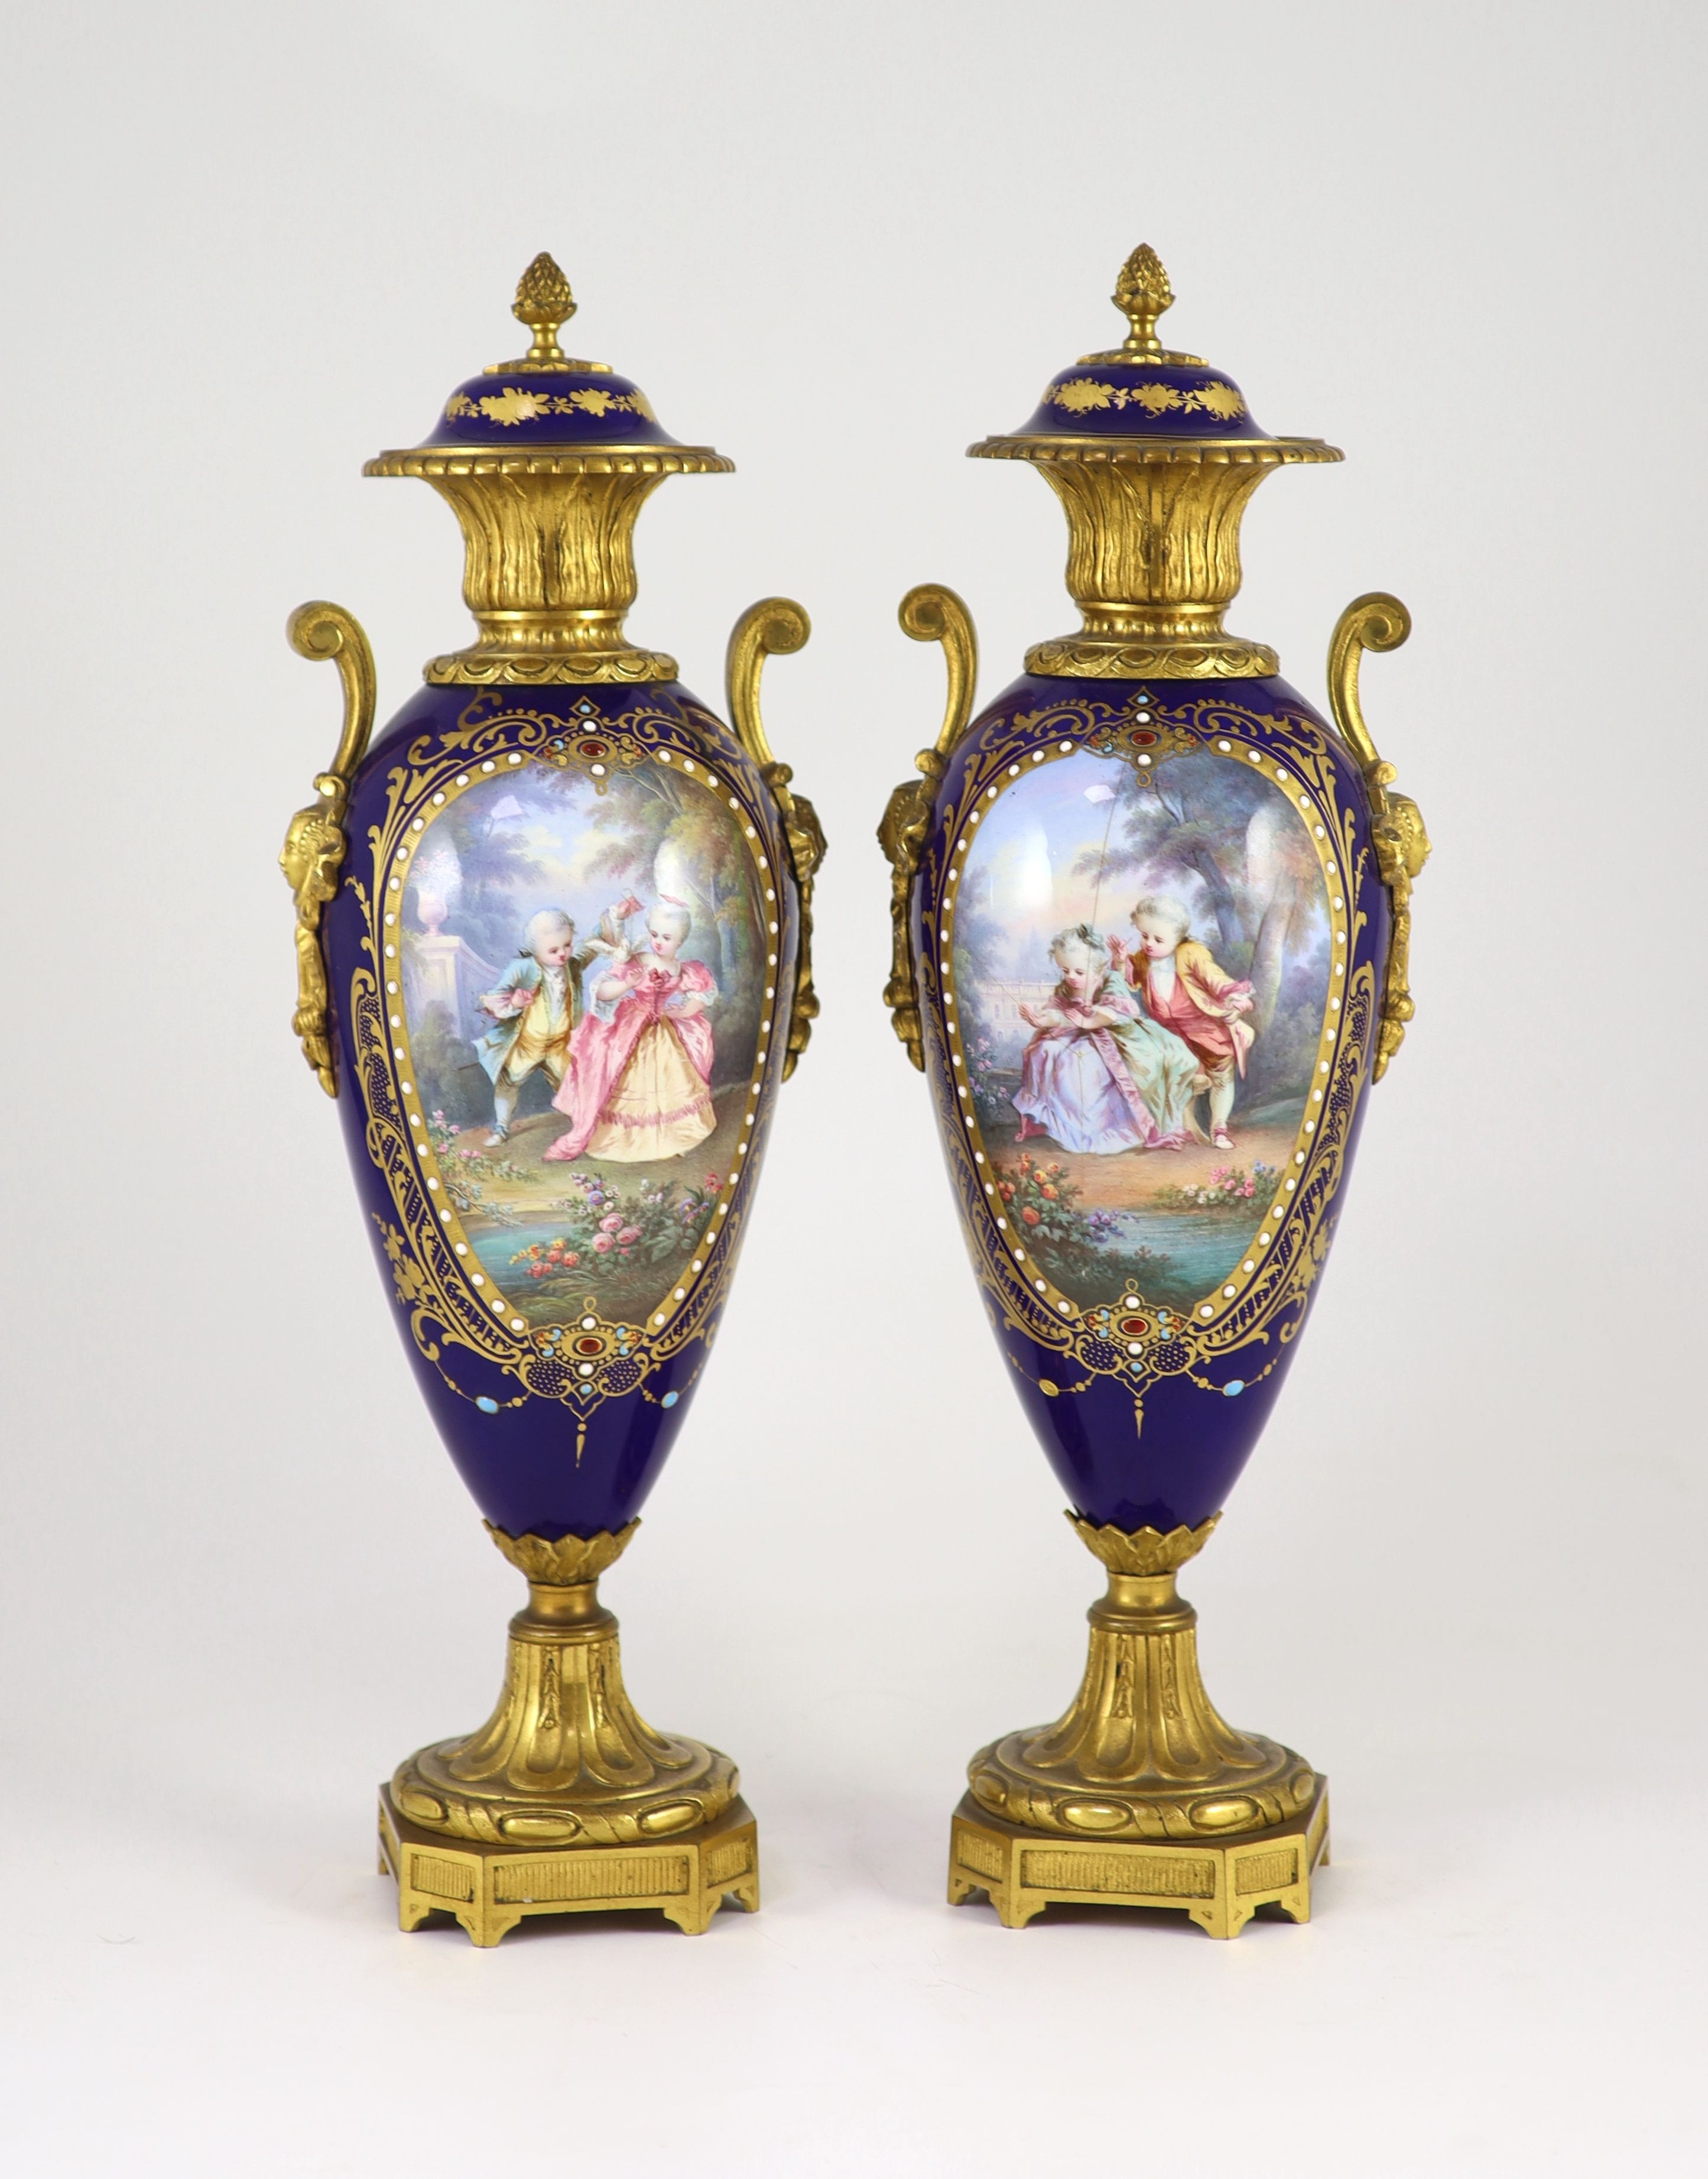 A pair of Sevres style ‘jewelled’ porcelain and ormolu mounted vases, c.1900, 41.5 cm high, one vase cracked